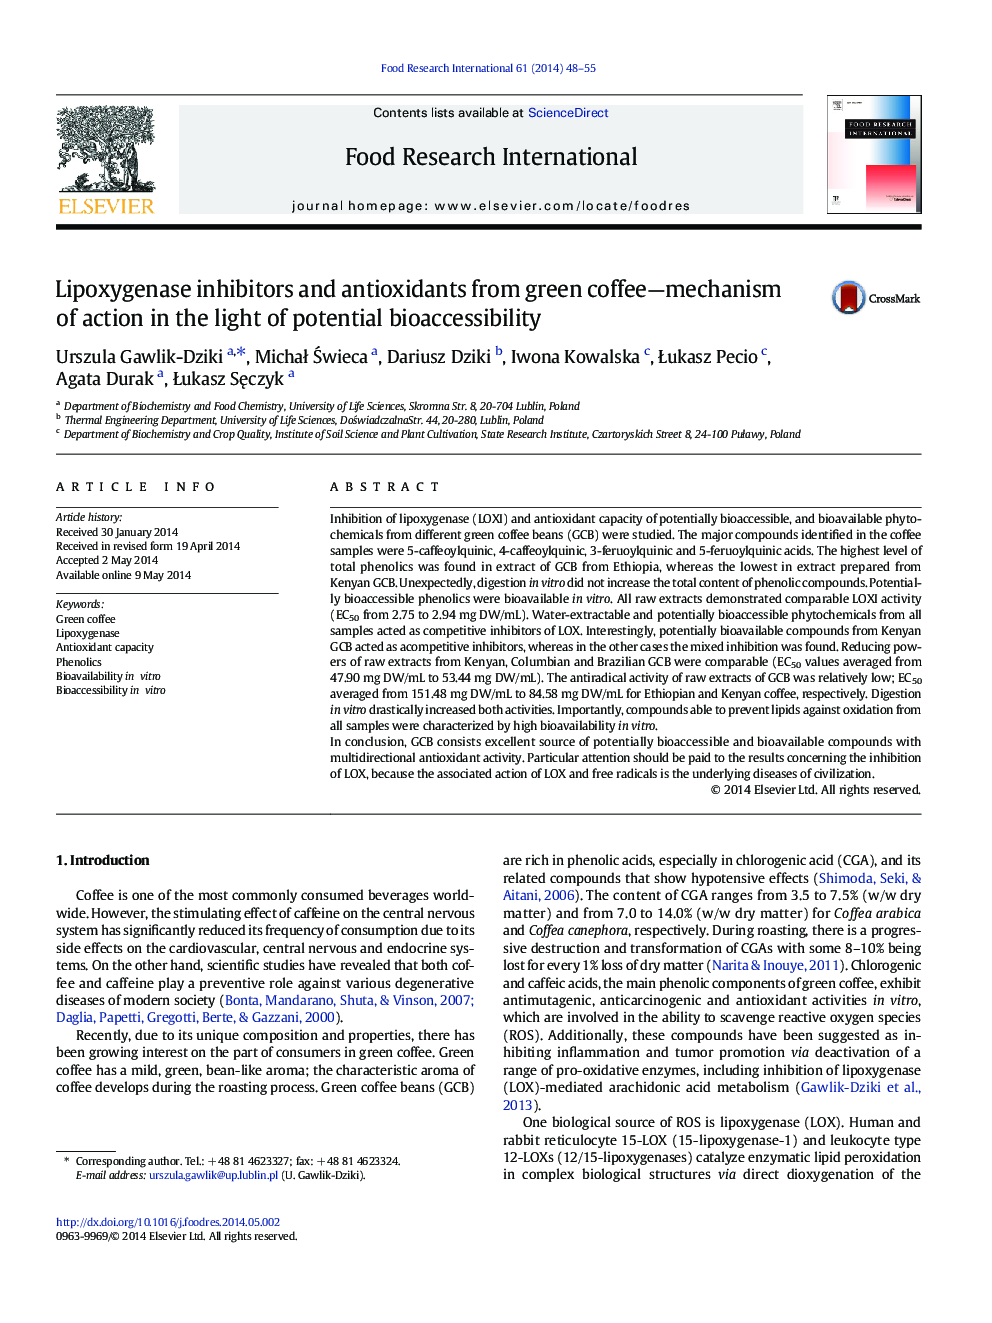 Lipoxygenase inhibitors and antioxidants from green coffee-mechanism of action in the light of potential bioaccessibility